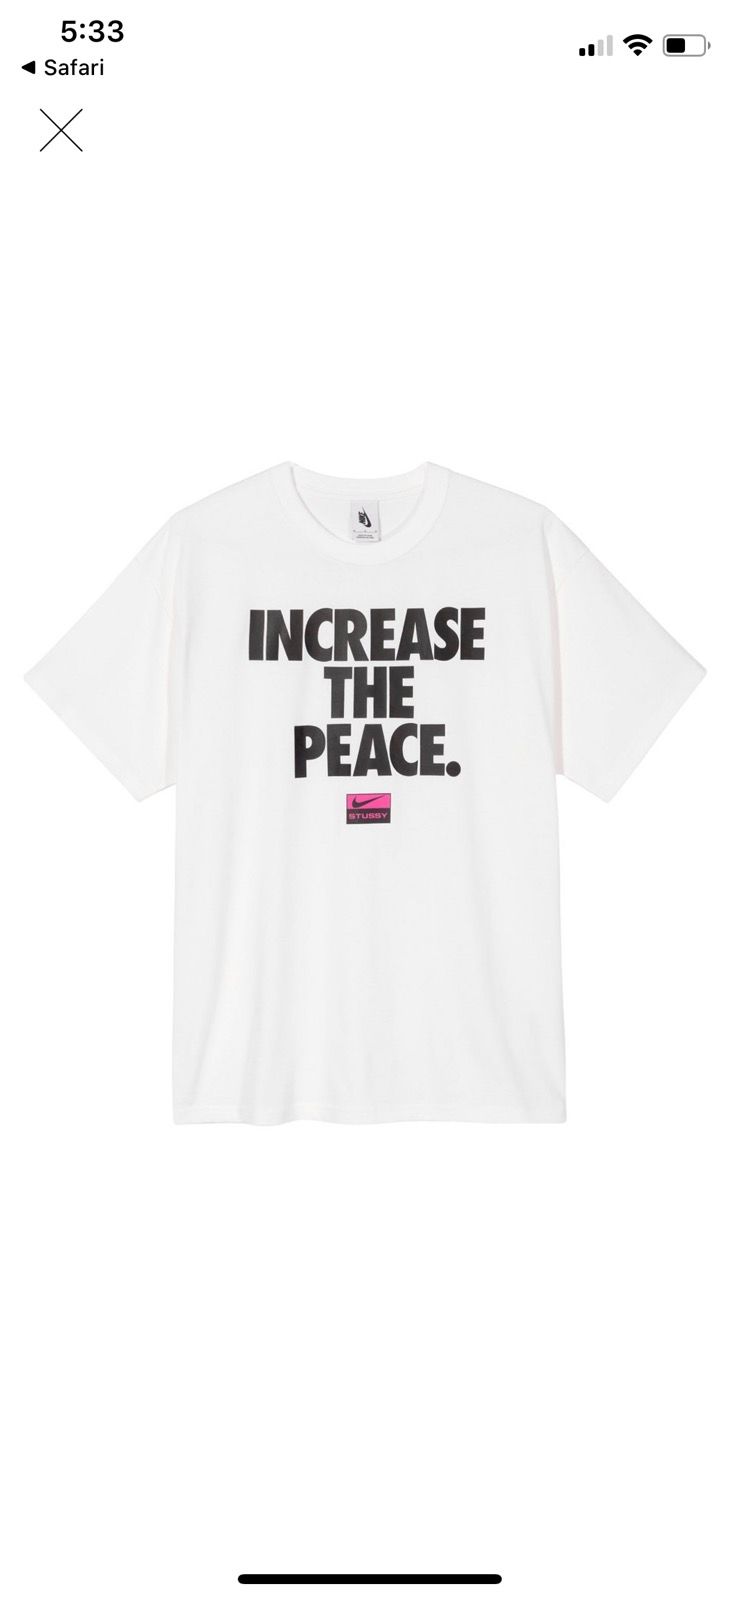 Nike Stussy Nike Increase The Peace T-shirt Size US L / EU 52-54 / 3 - 1 Preview